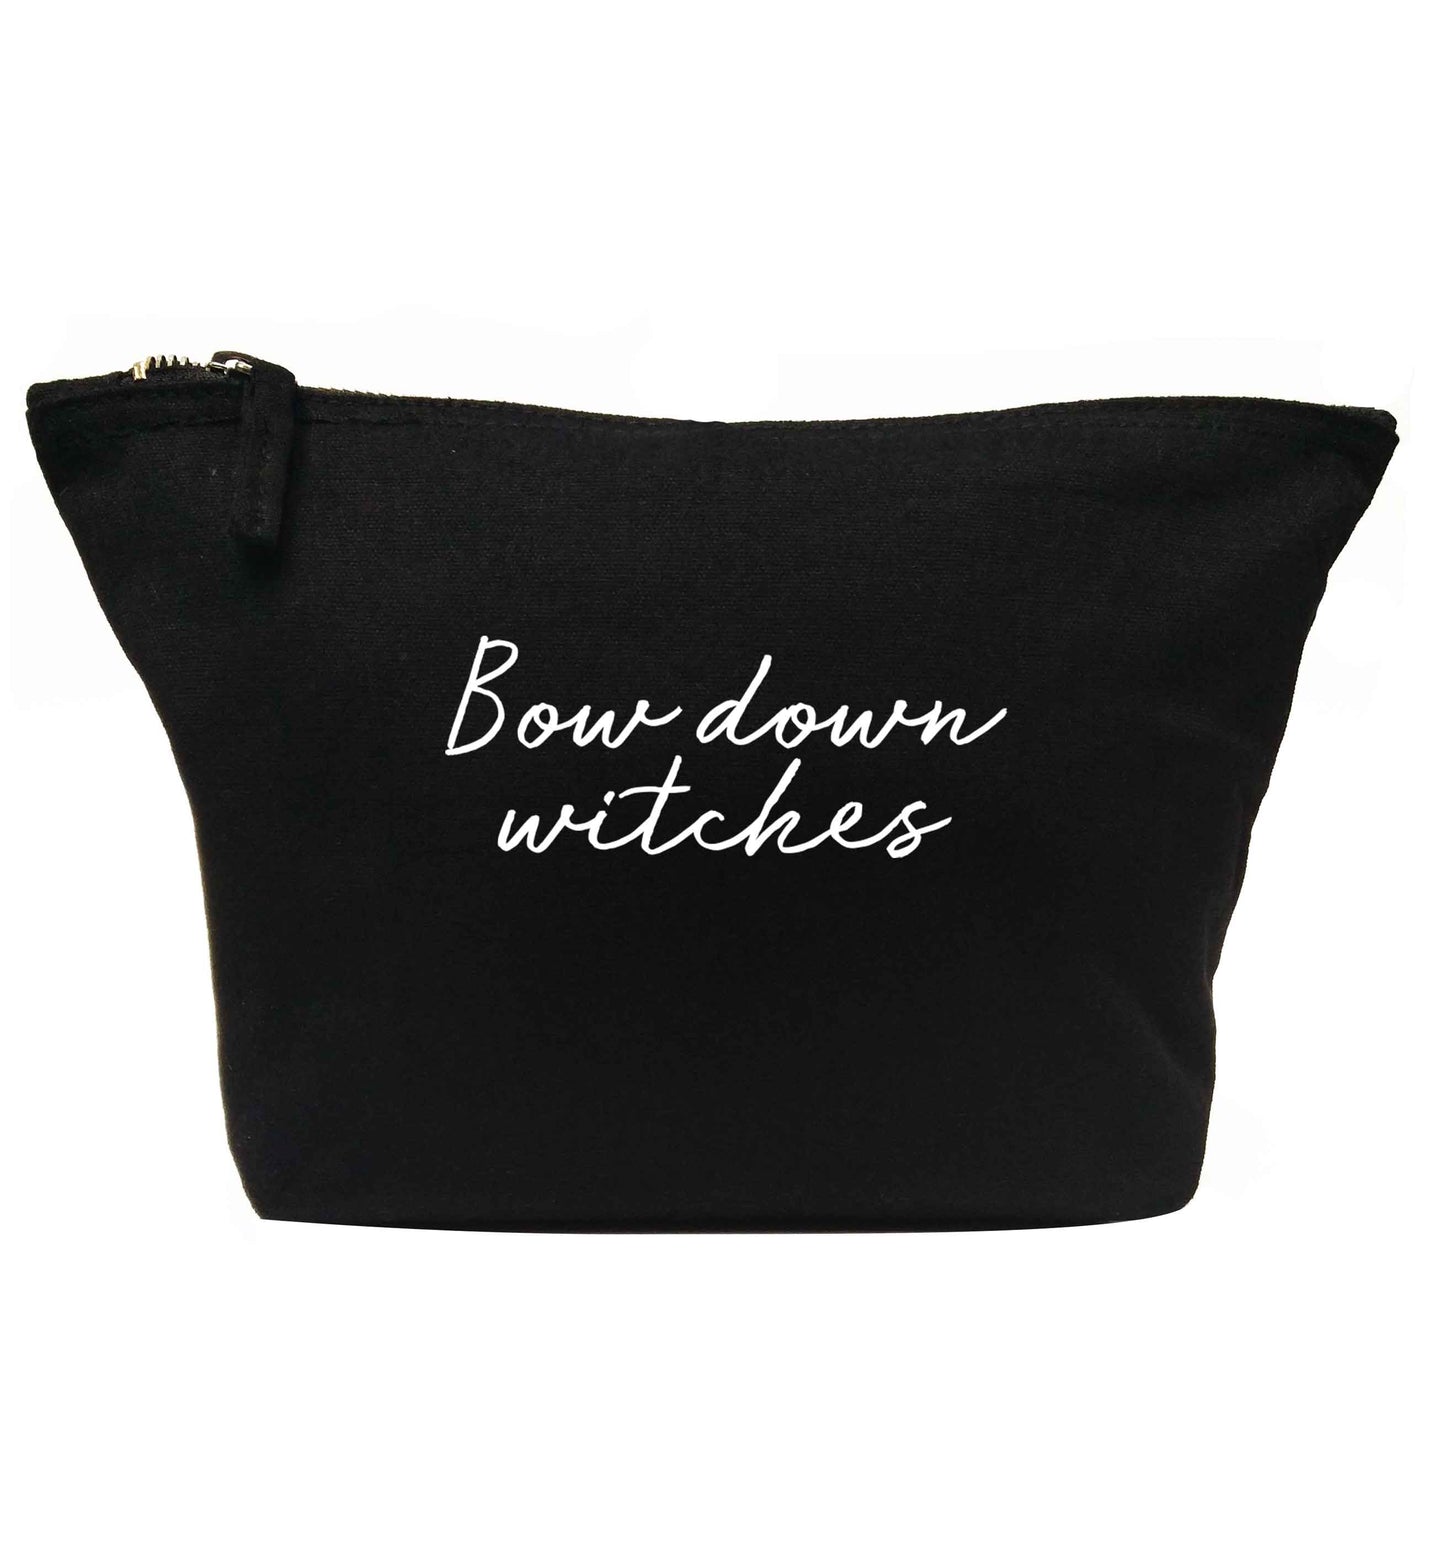 Bow down witches | Makeup / wash bag